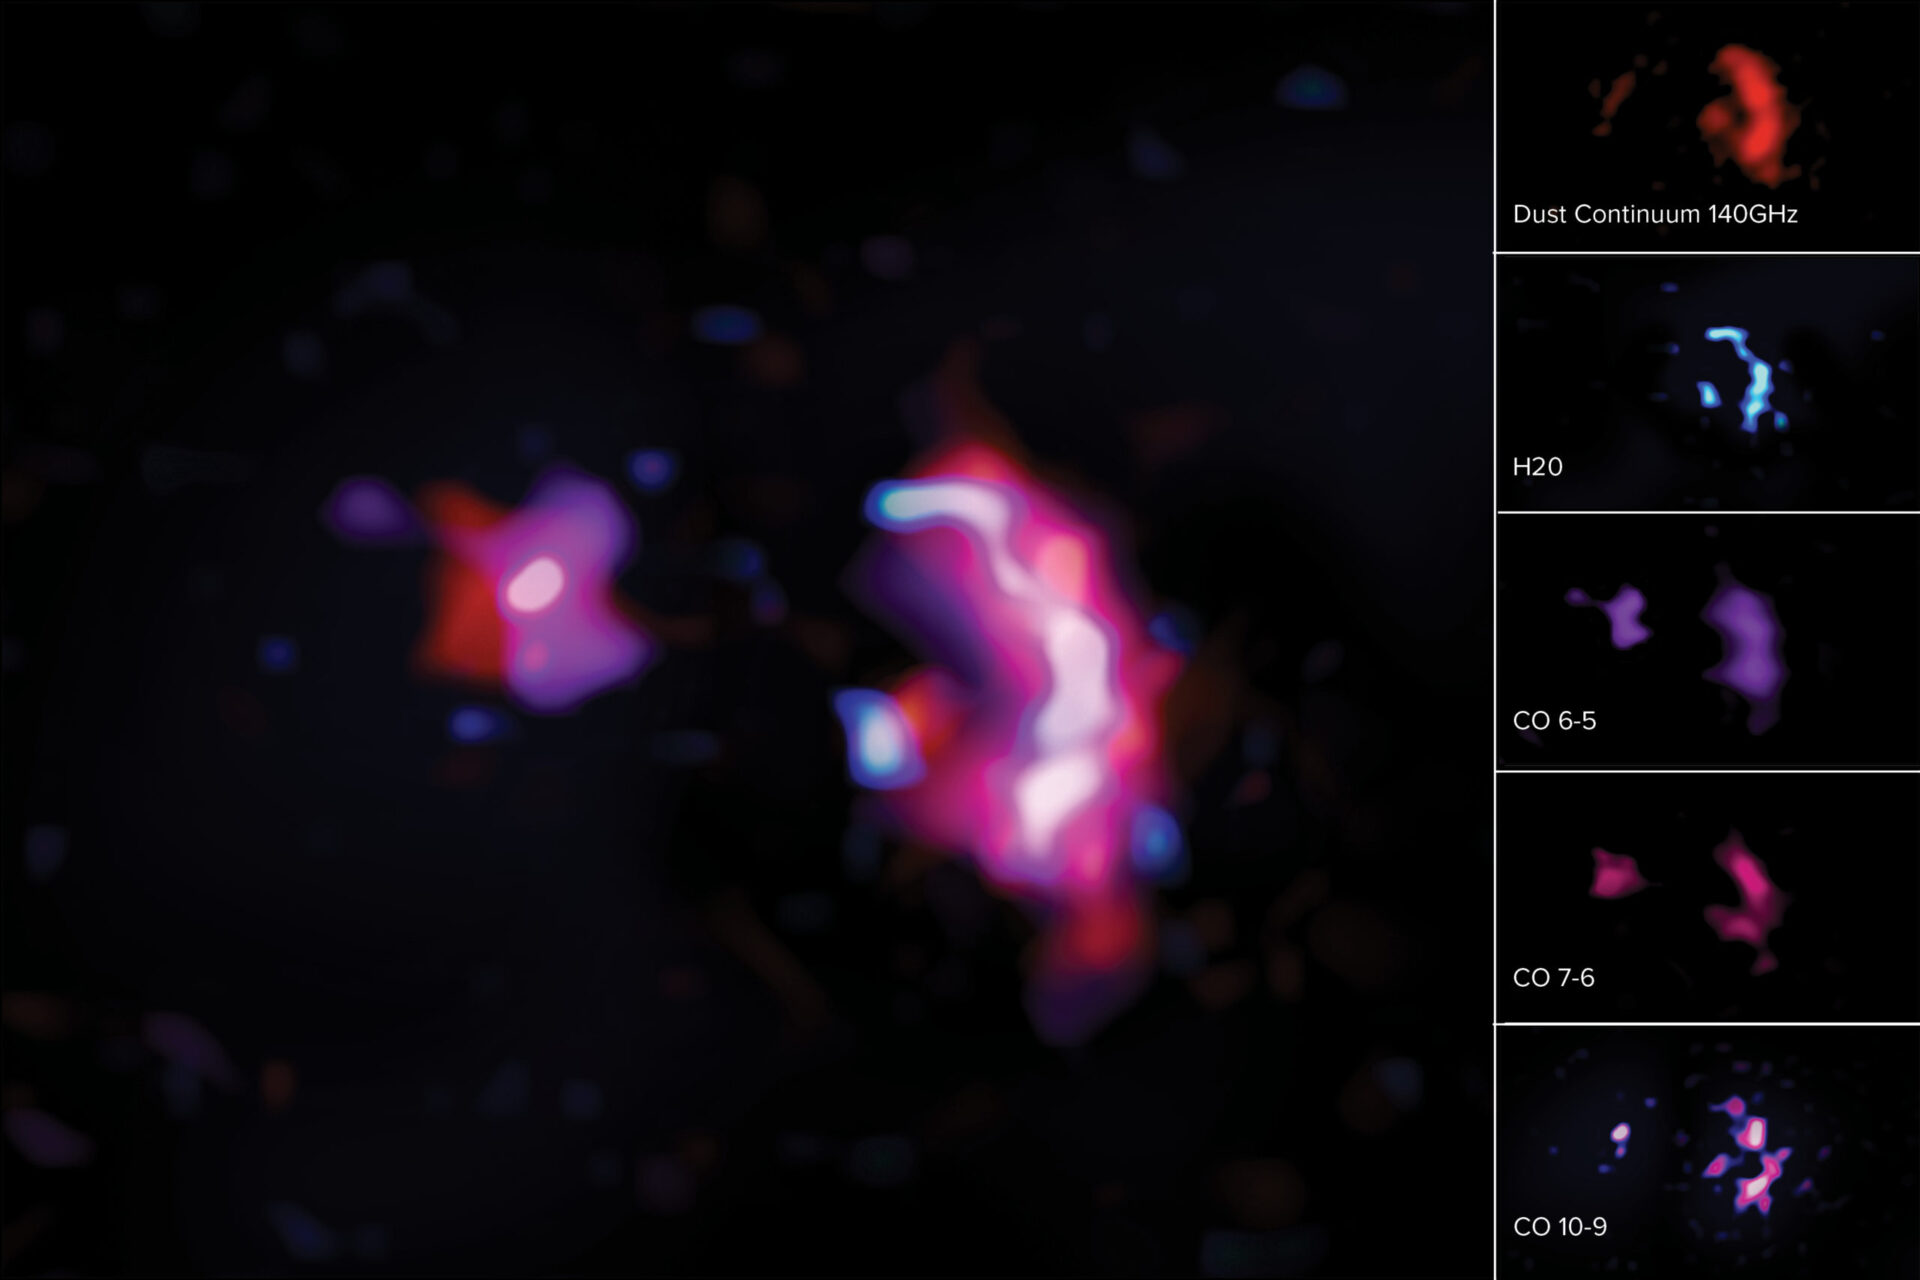 These science images show the molecular lines and dust continuum seen in ALMA observations of the pair of early massive galaxies known as SPT0311-58. On left: A composite image combining the dust continuum with molecular lines for H20 and CO. On right: The dust continuum seen in red (top), molecular line for H20 shown in blue (2nd from top), molecular line transitions for carbon monoxide, CO(6-5) shown in purple (middle), CO(7-6) shown in magenta (second from bottom), and CO(10-9) shown in pinks and deep blue (bottom). Credit: ALMA (ESO/NAOJ/NRAO)/S. Dagnello (NRAO)